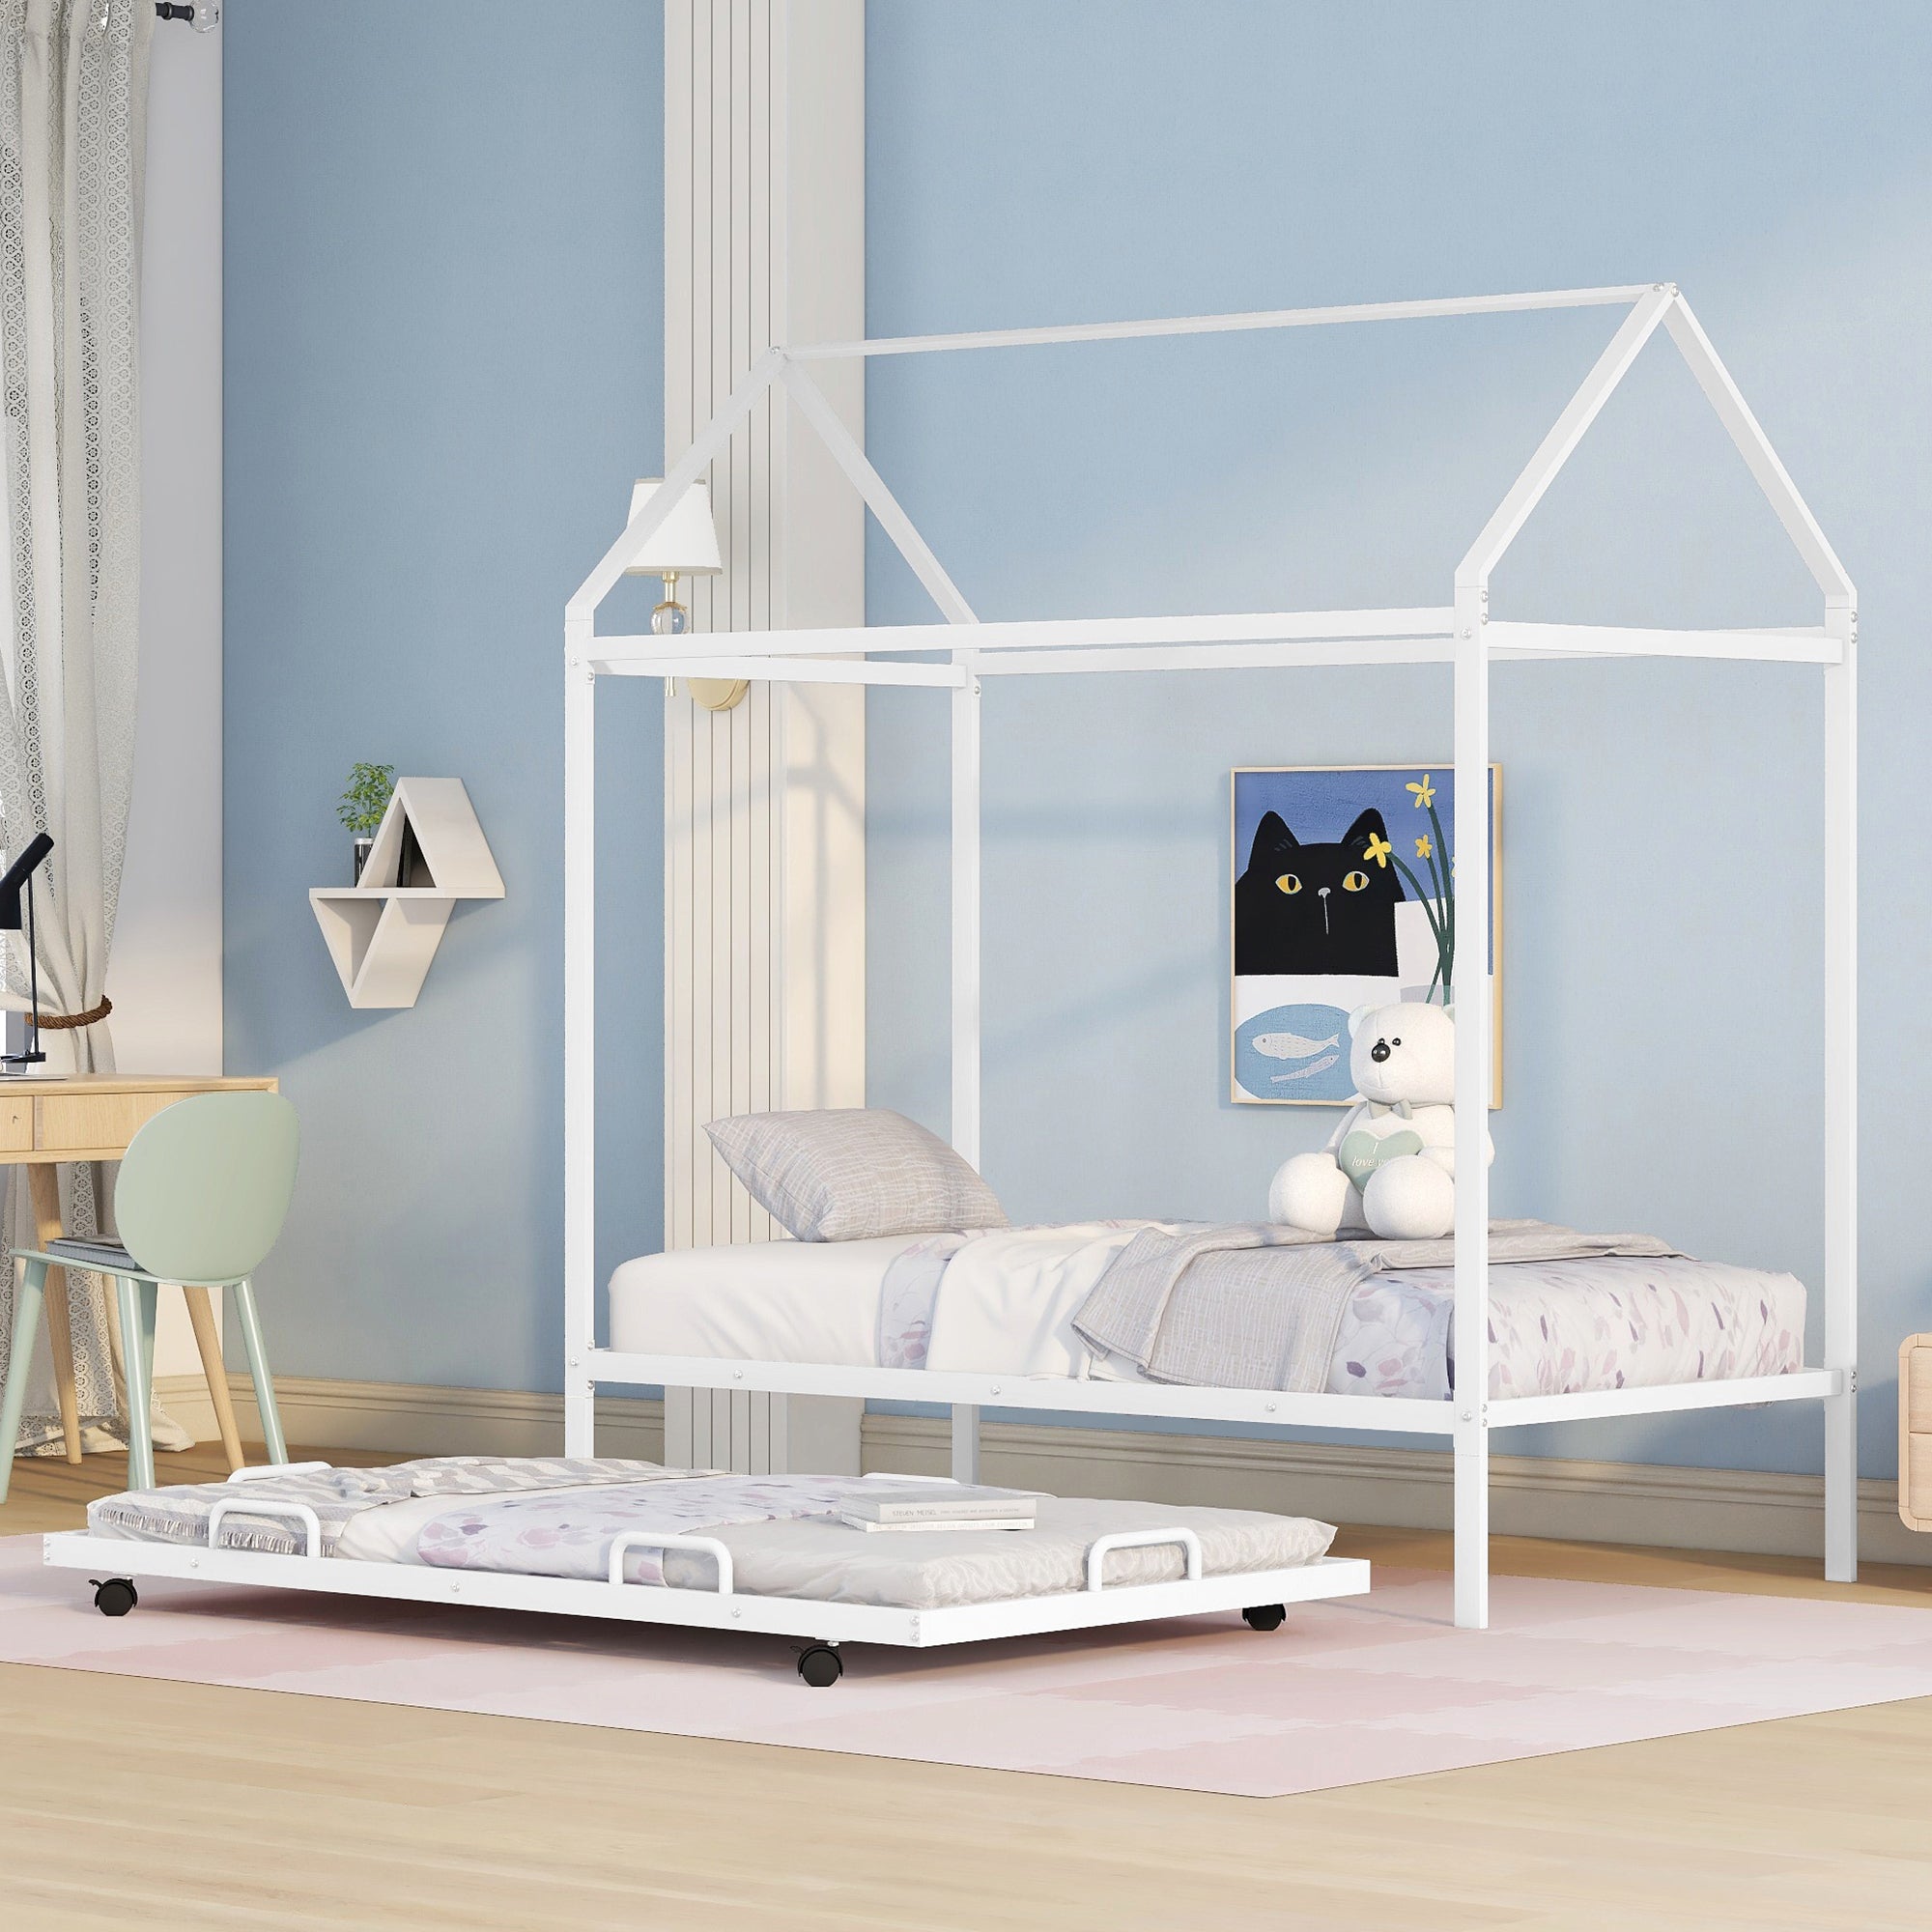 Twin-Size-Kids-House-Bed-With-Trundle,-Metal-House-Bed-White-Kids-Beds